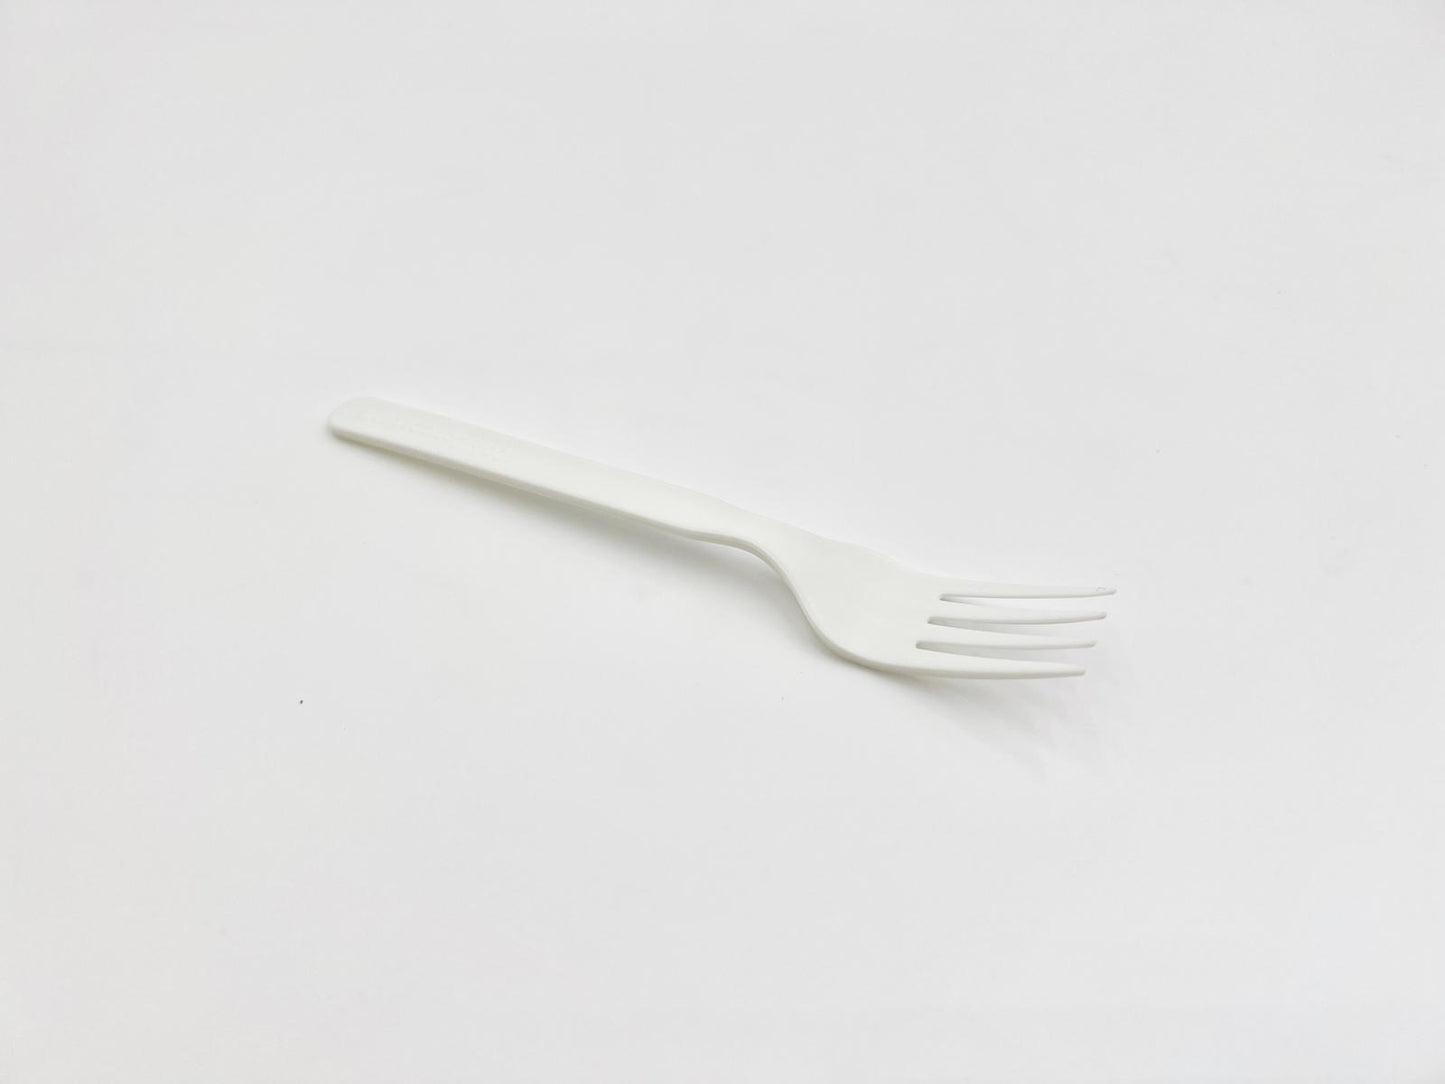 6.5 inch CPLA Compostable Fork – 1000 Pieces - Memeda US